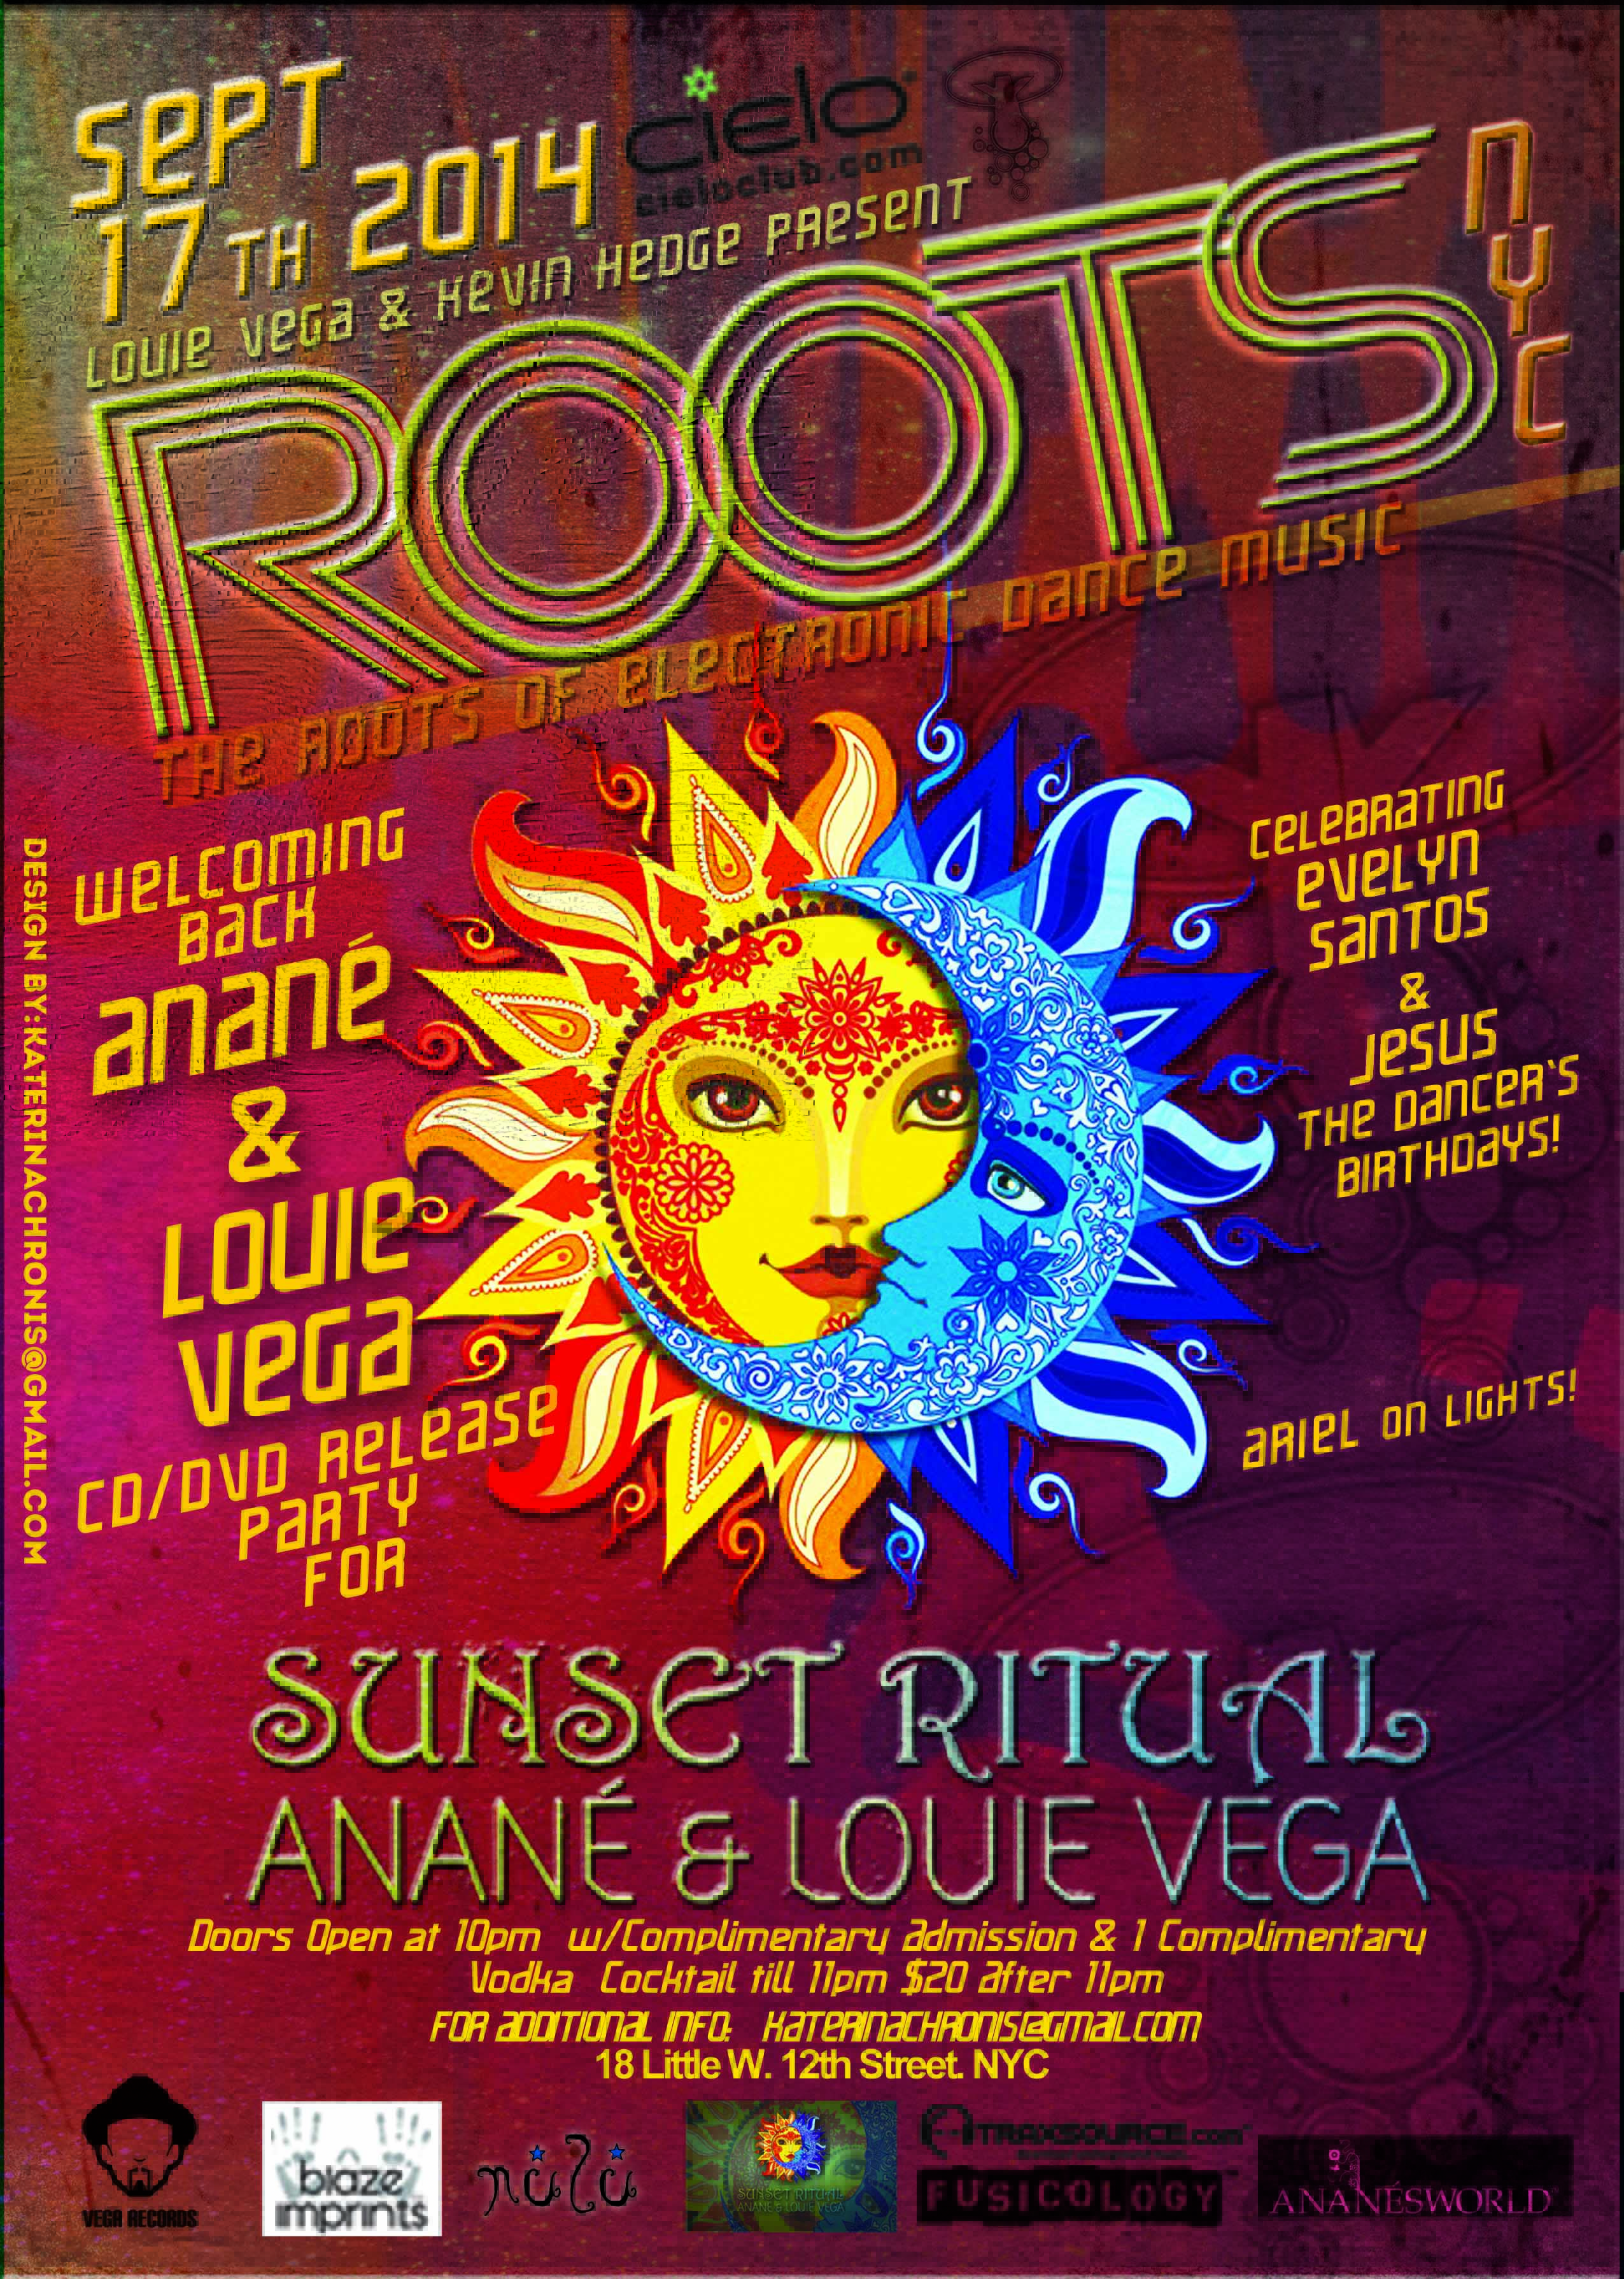 SEPT 17, 2014 ROOTS NYC SUNSET RITUAL CD DVD RELEASE PARTY